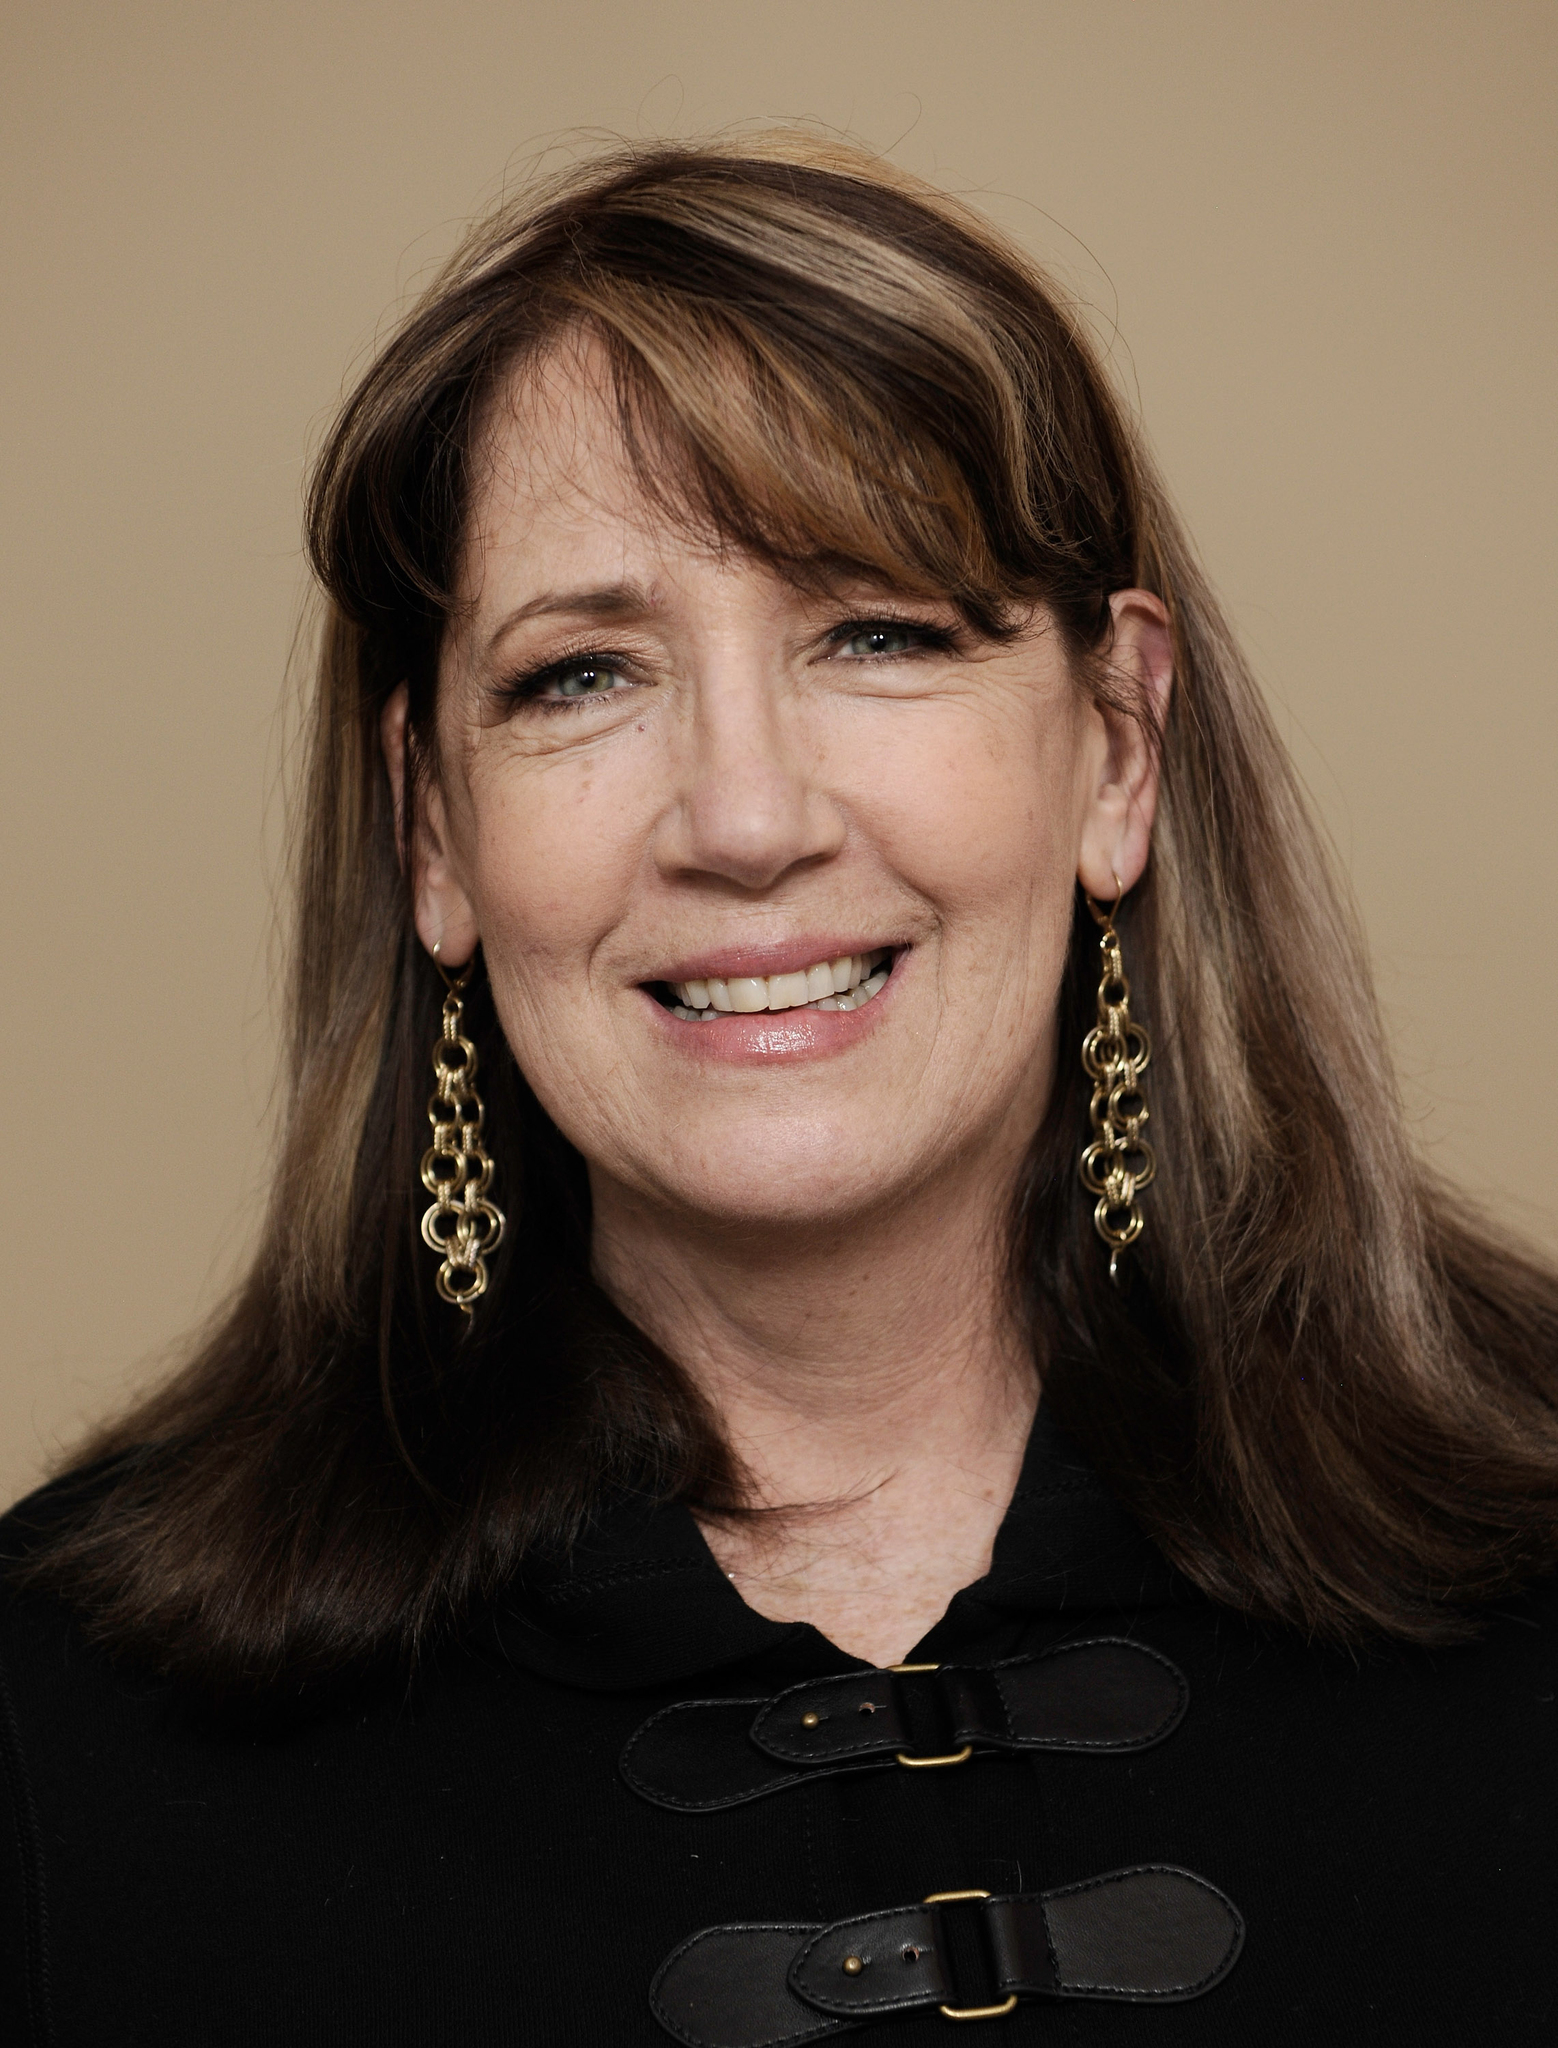 Actress Ann Dowd poses for a portrait during the 2012 Sundance Film Festival at the Getty Images Portrait Studio at T-Mobile Village at the Lift on January 21, 2012 in Park City, Utah.